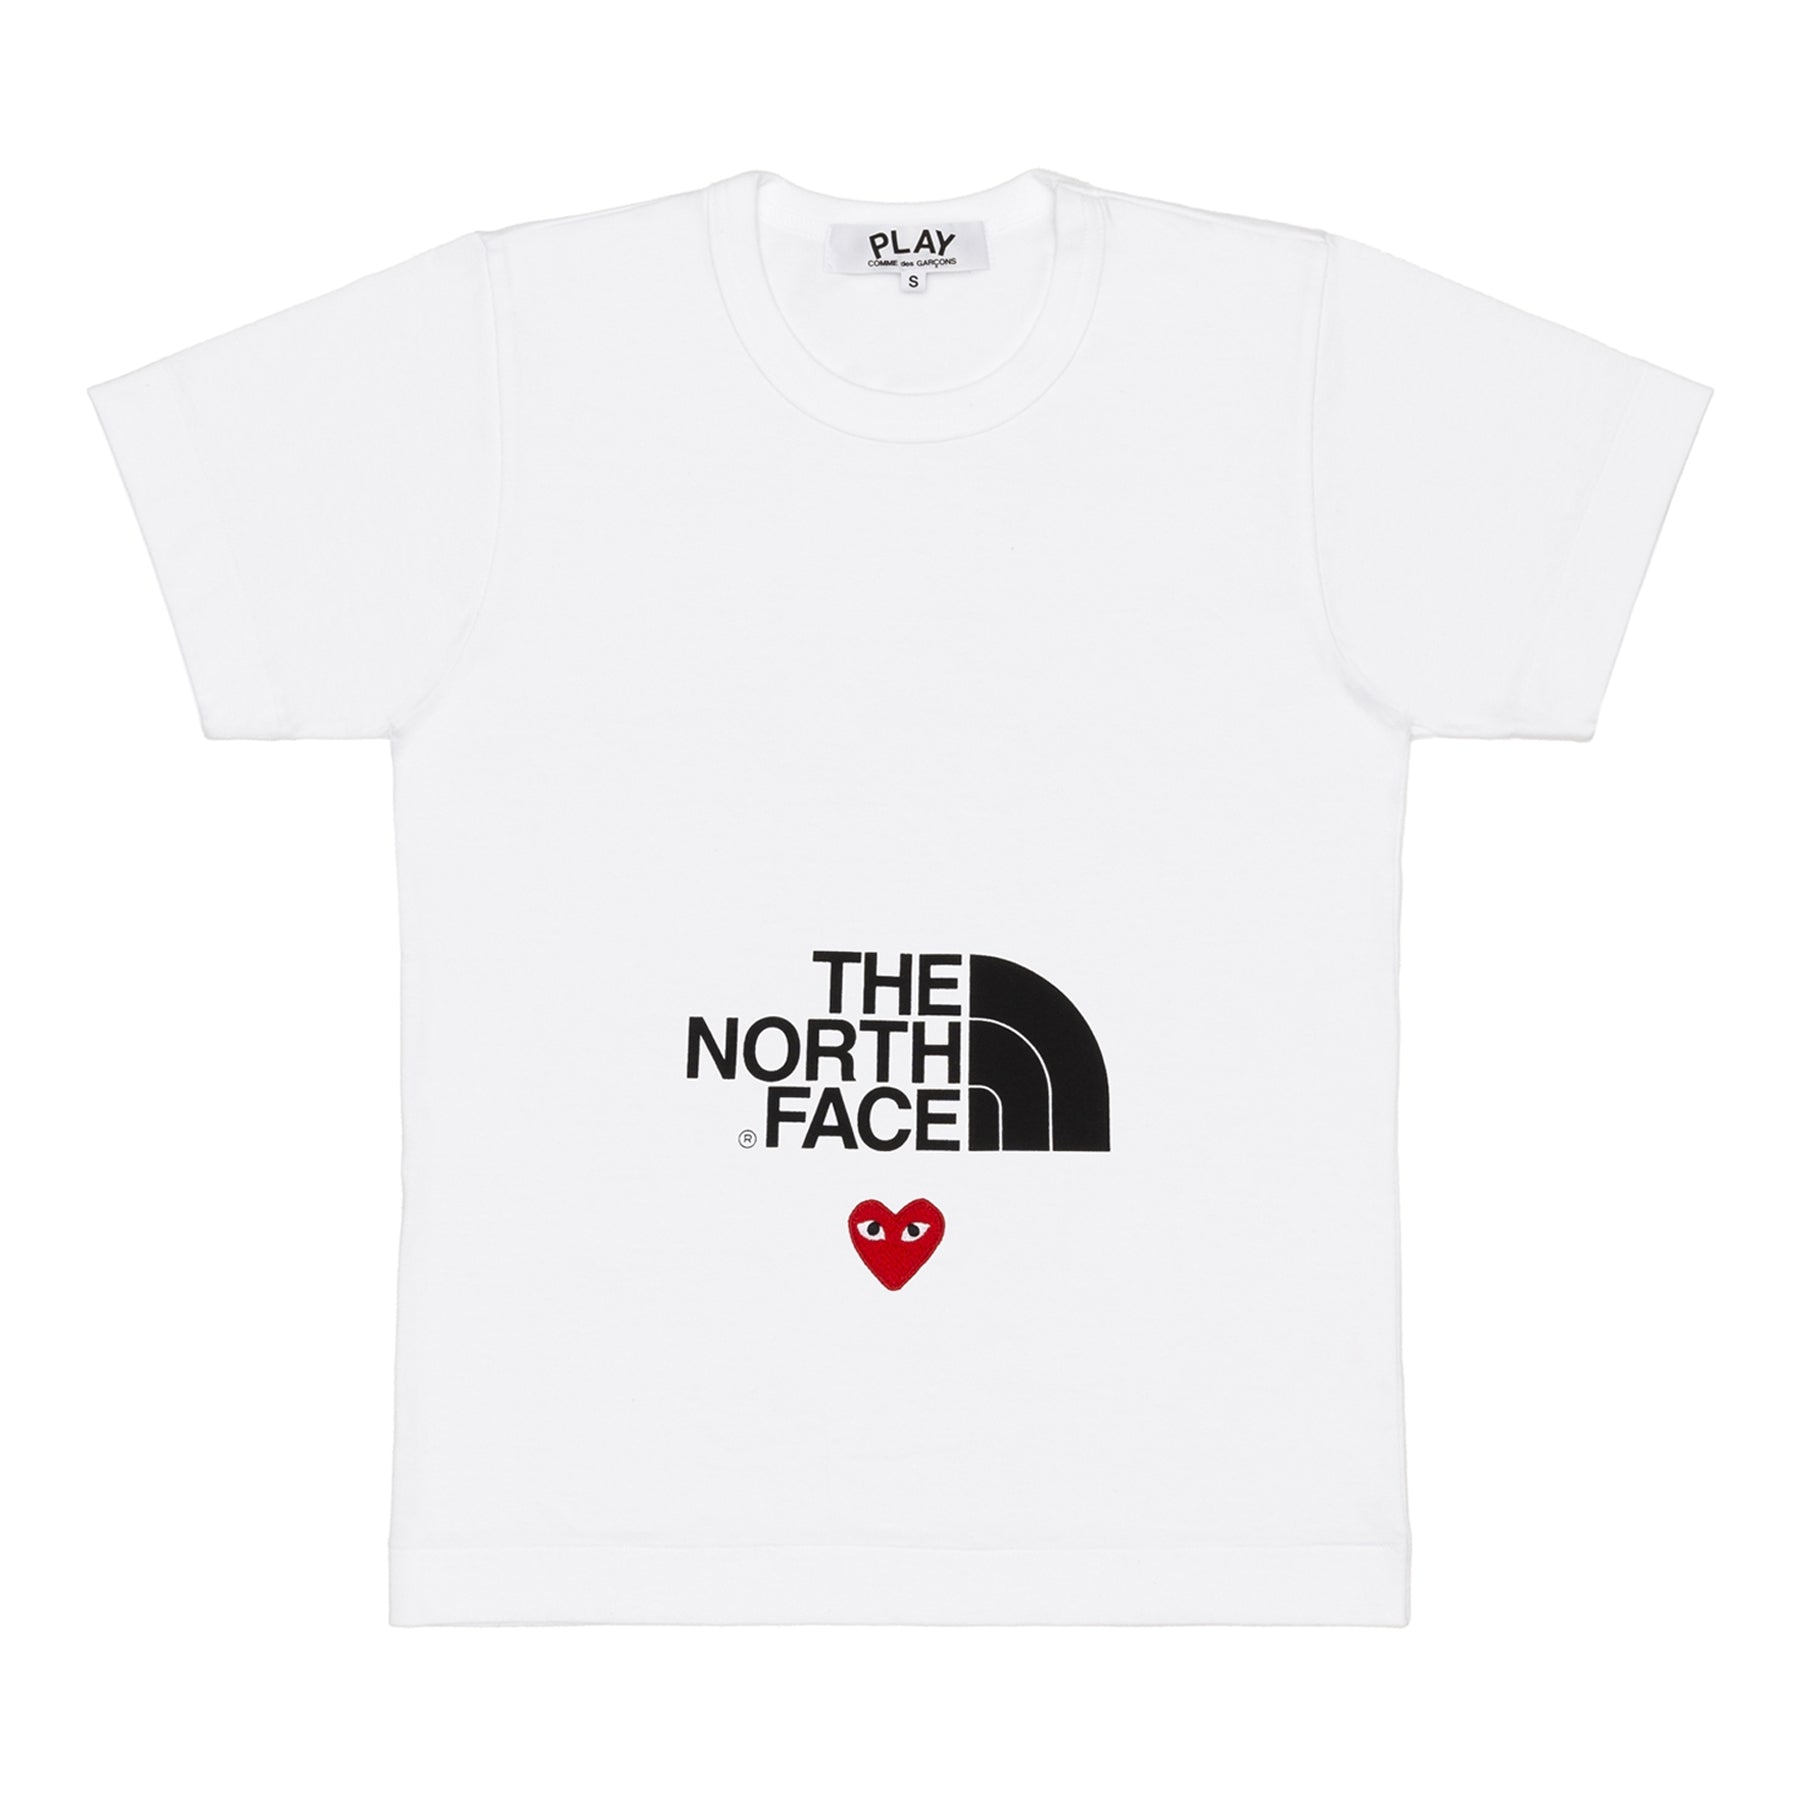 CDG PLAY - The North Face X Play T-Shirt - (White) view 1